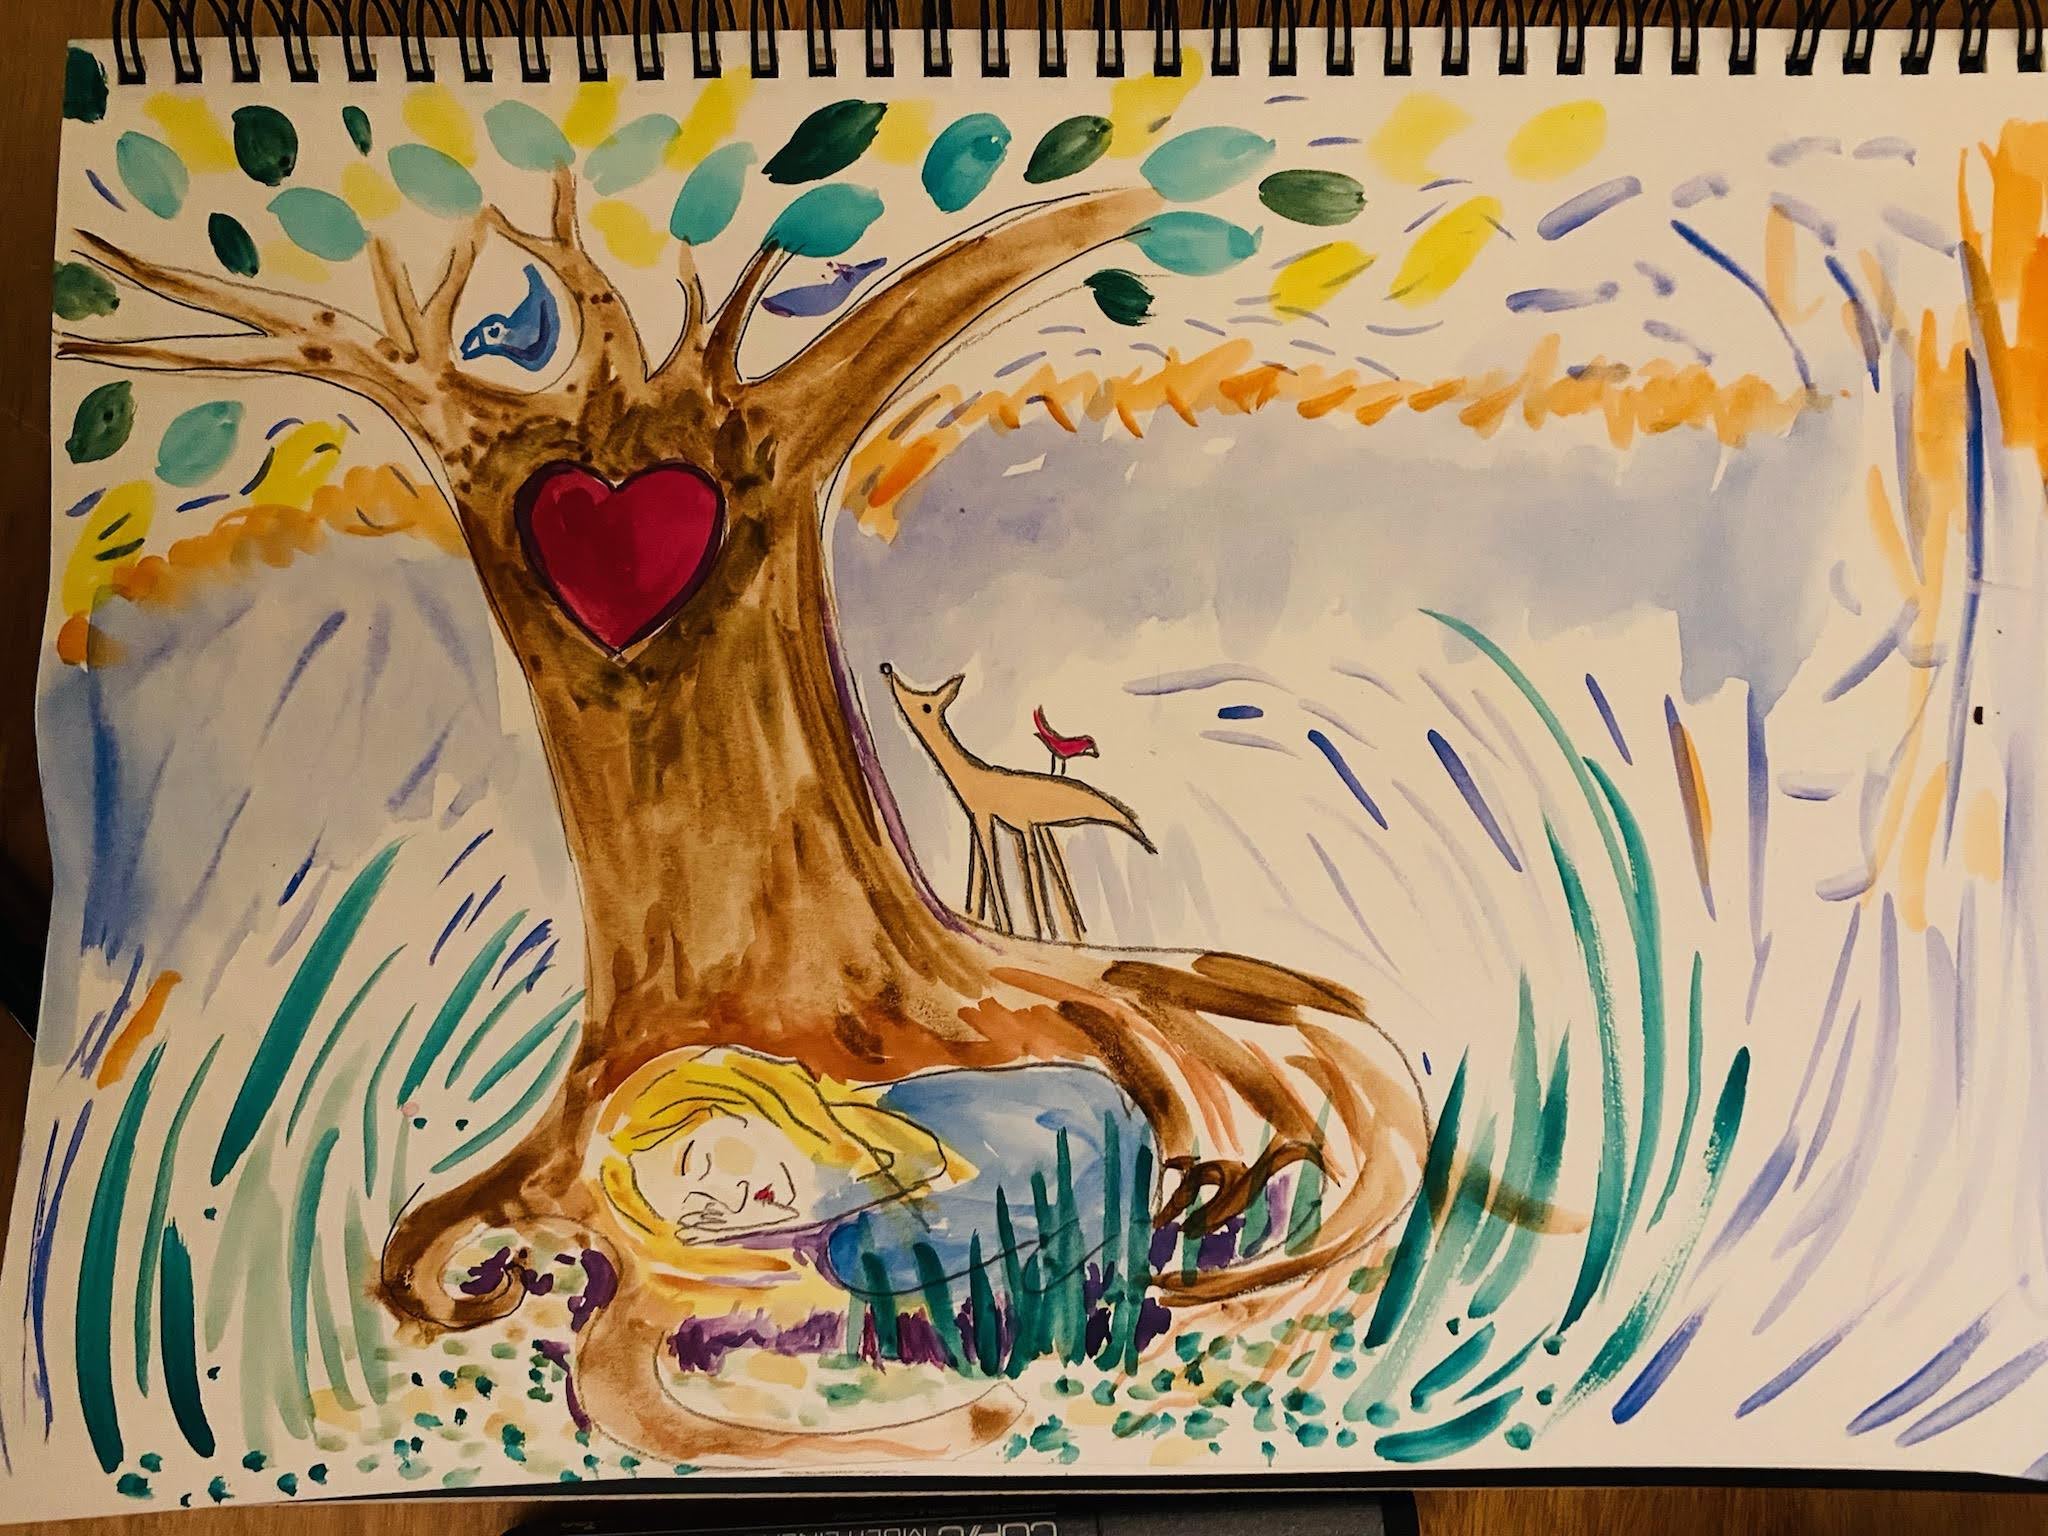 ‘Heartwood’ Art work done by Alex Childs as part of the Art Therapy sessionAugust 2021